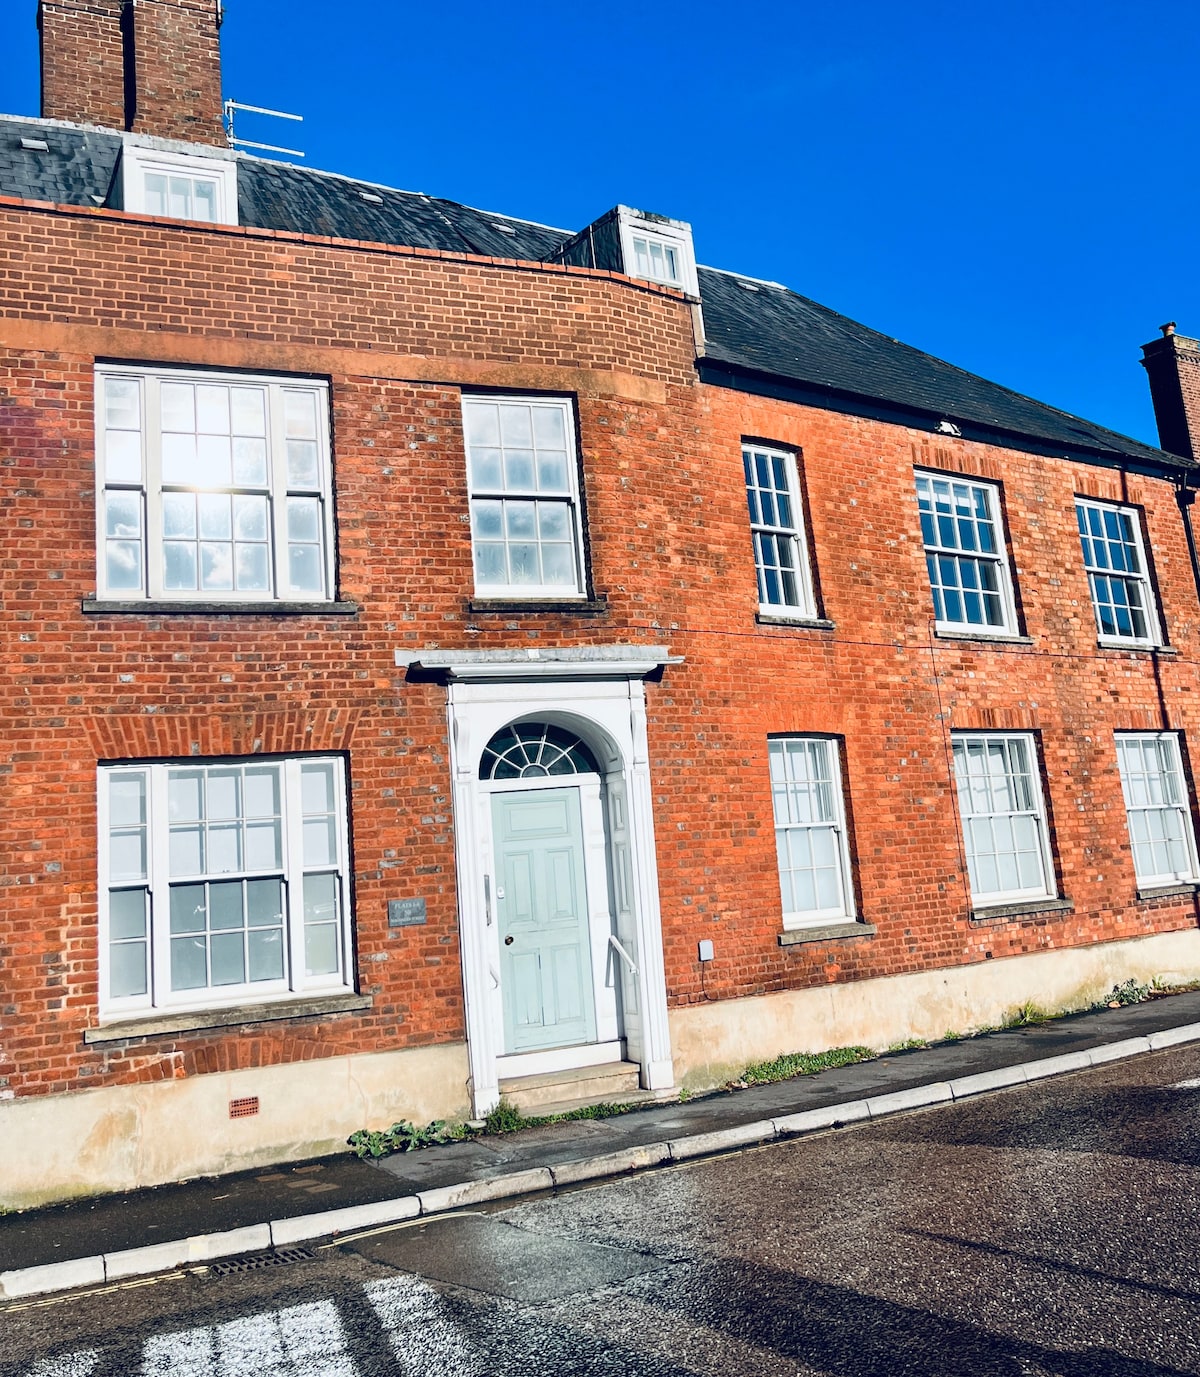 3 Bed Flat Exeter city centre